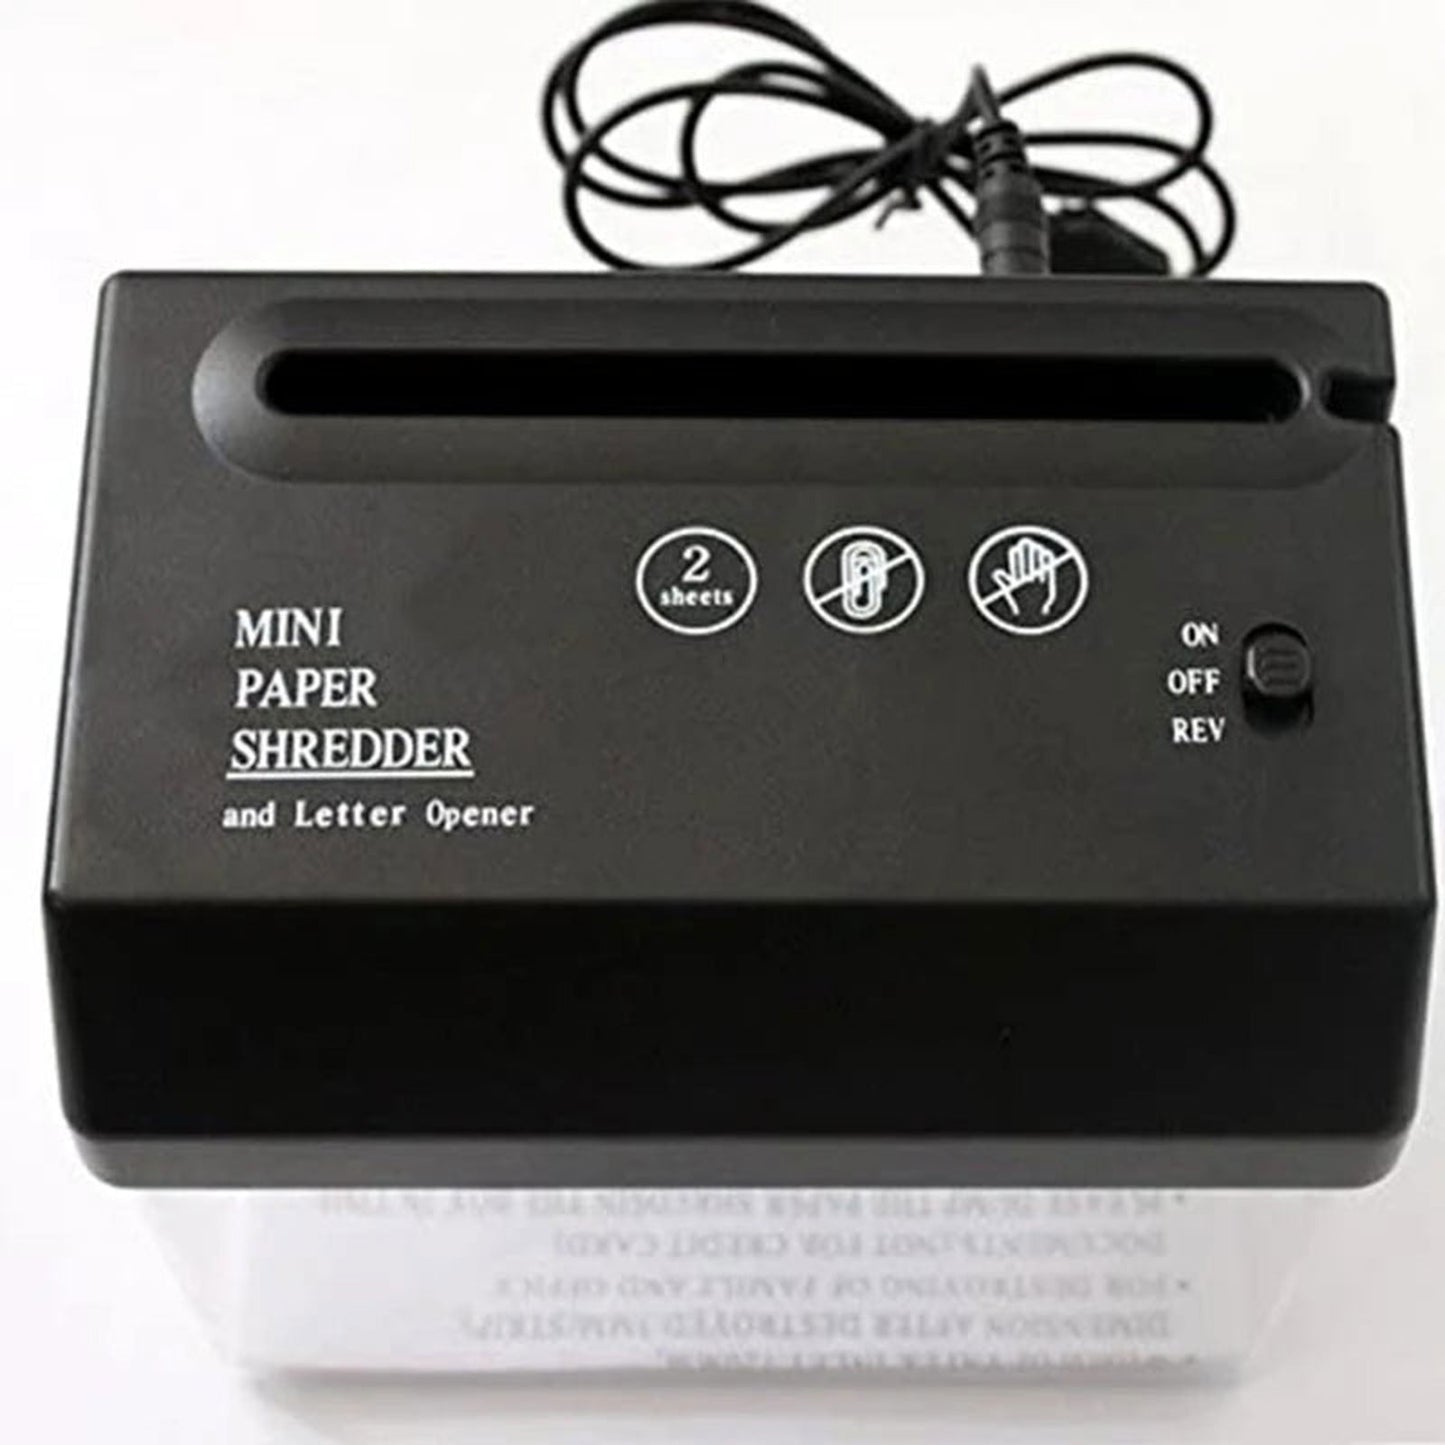 Portable Mini Paper Shredder Electric USB Battery Operated Shredder Documents Paper Cutting Tool for Home Office - ARCHE